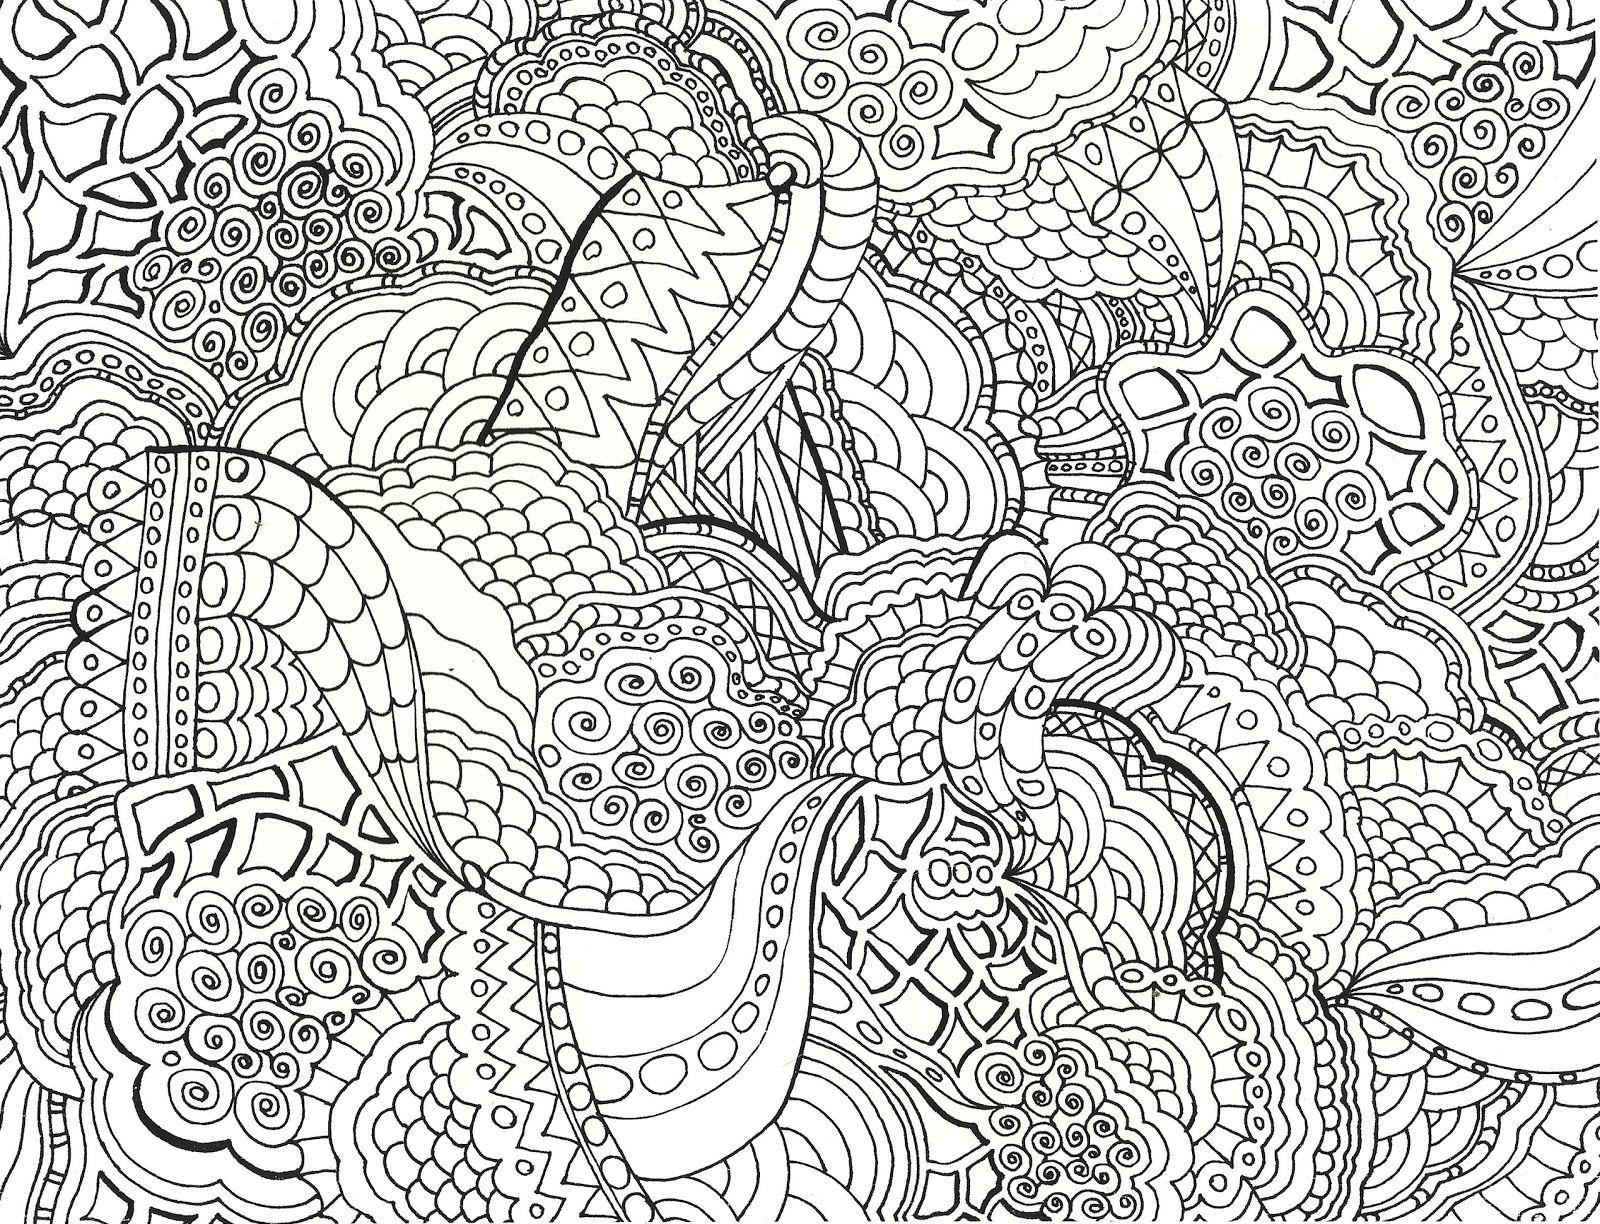 Cool Designs To Color In - Hard Abstract Coloring Pages For Adults ...